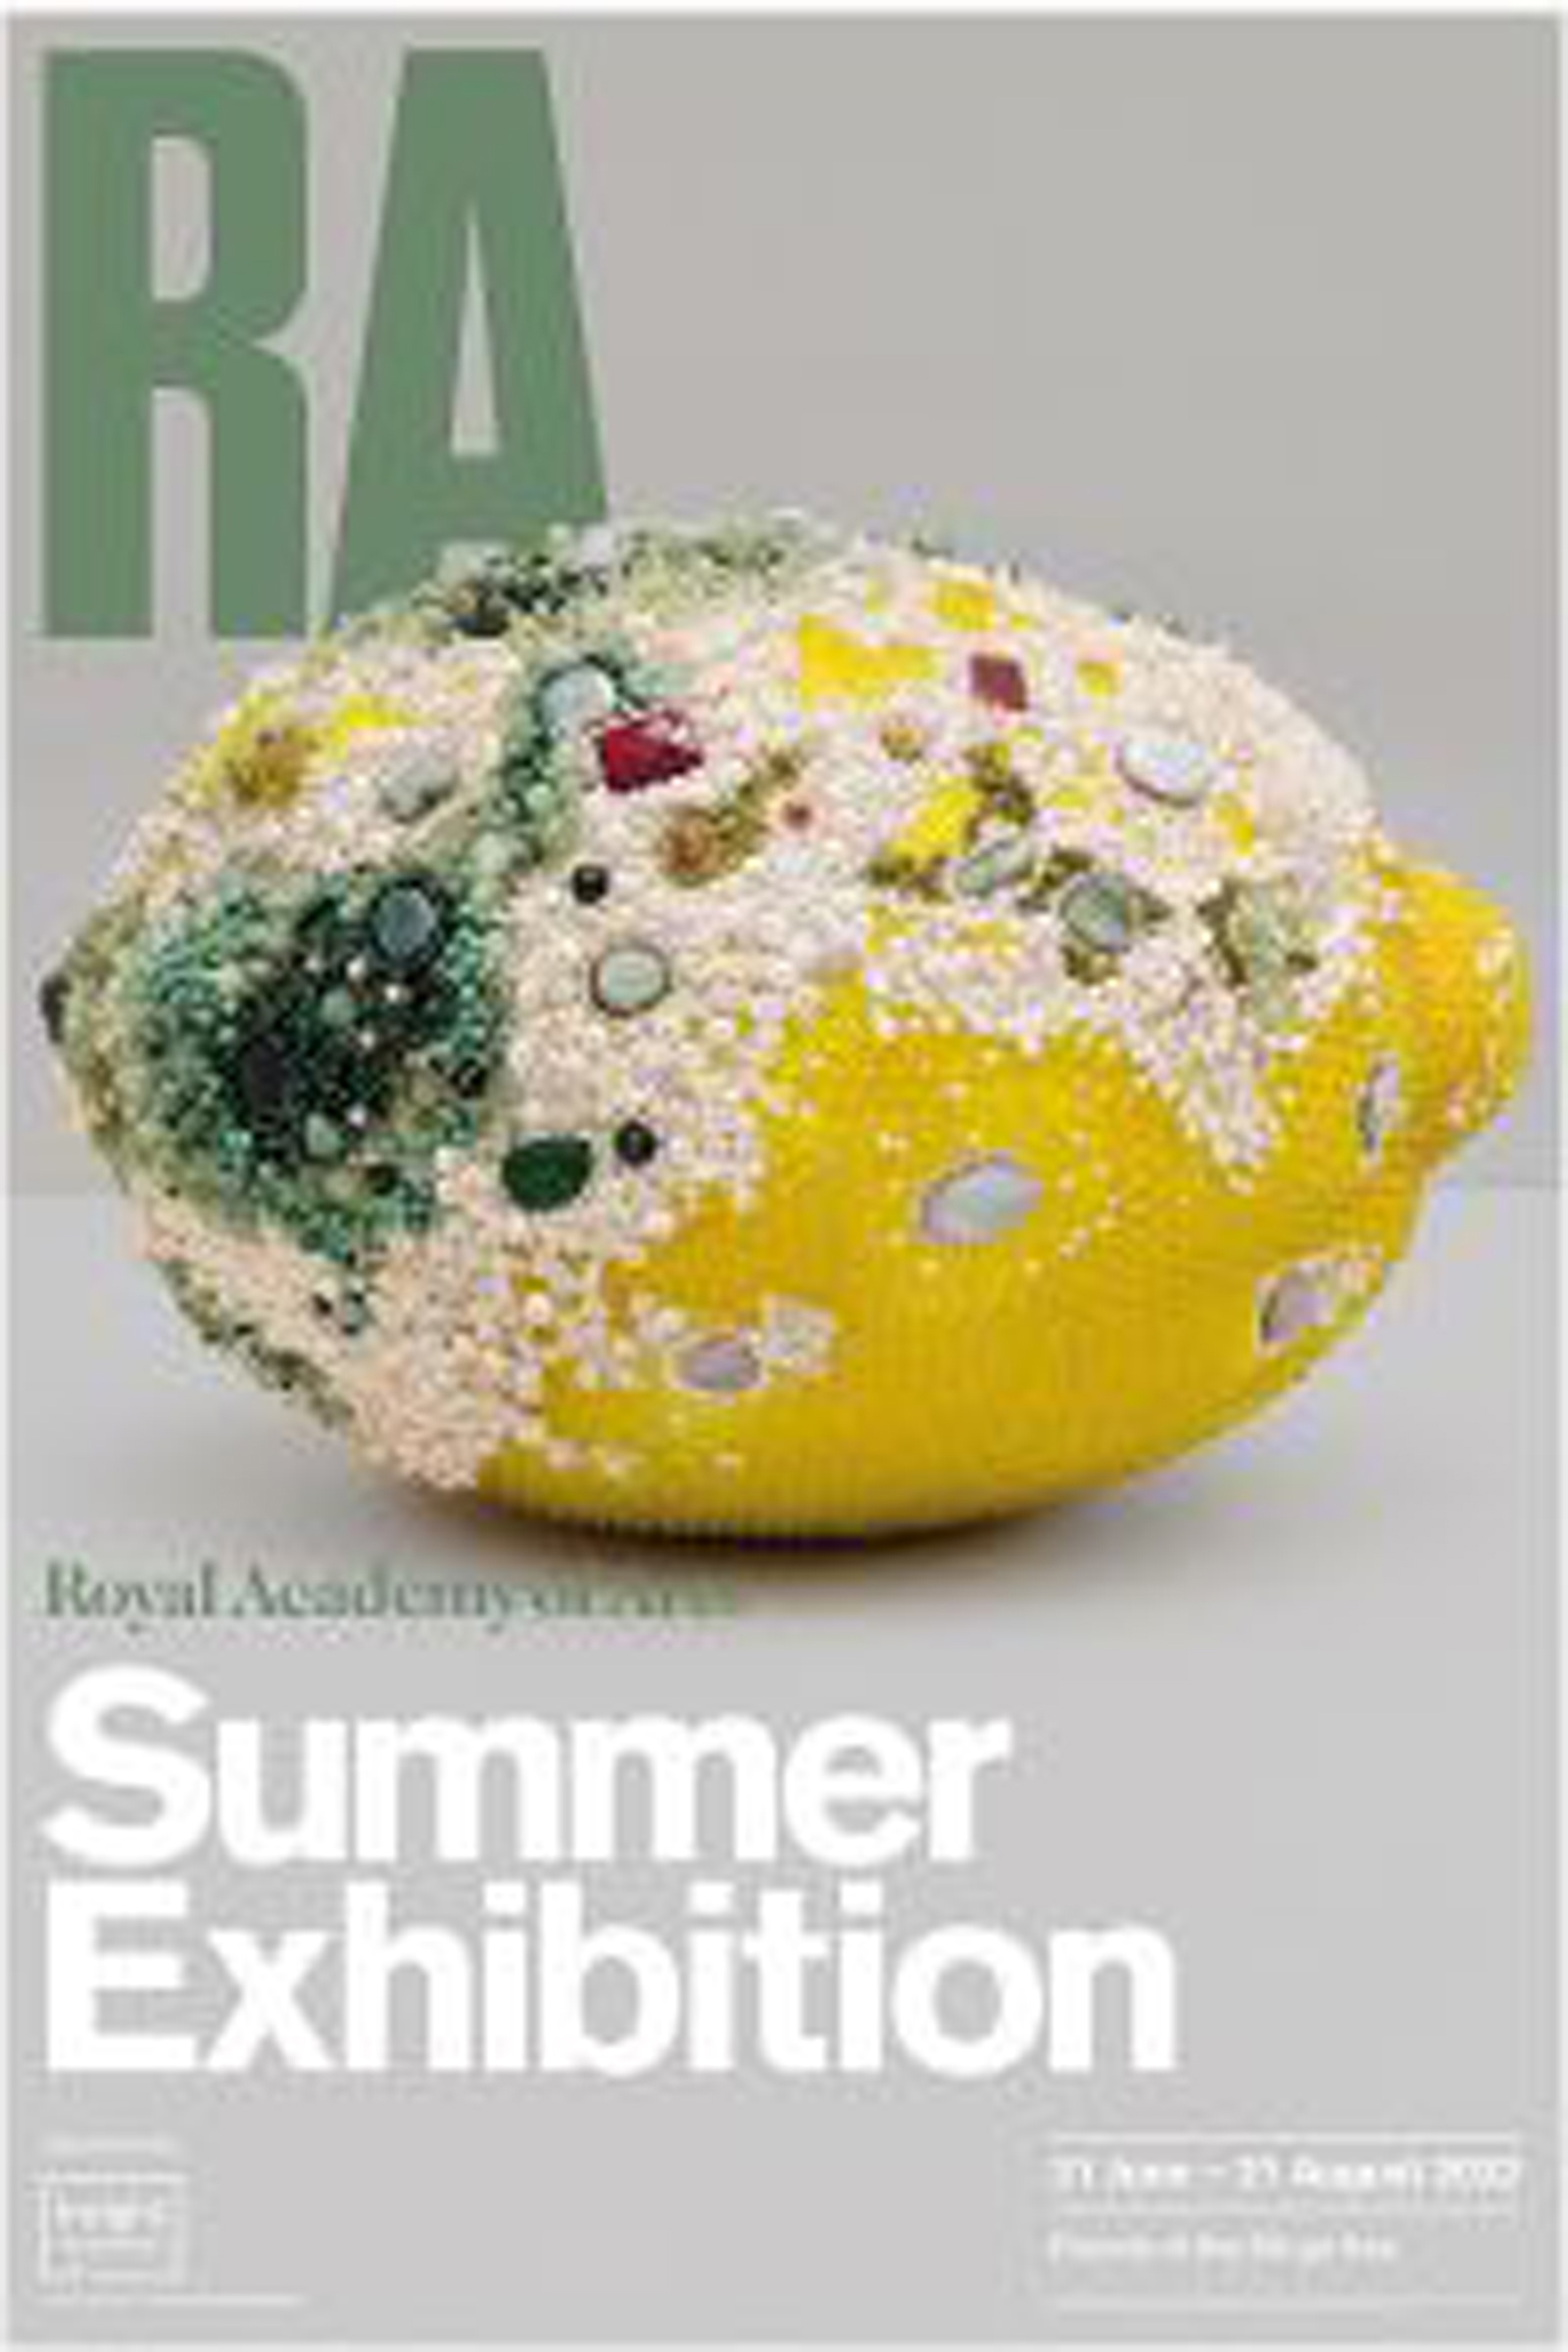 Summer Exhibition at the Royal Academy of Arts in London